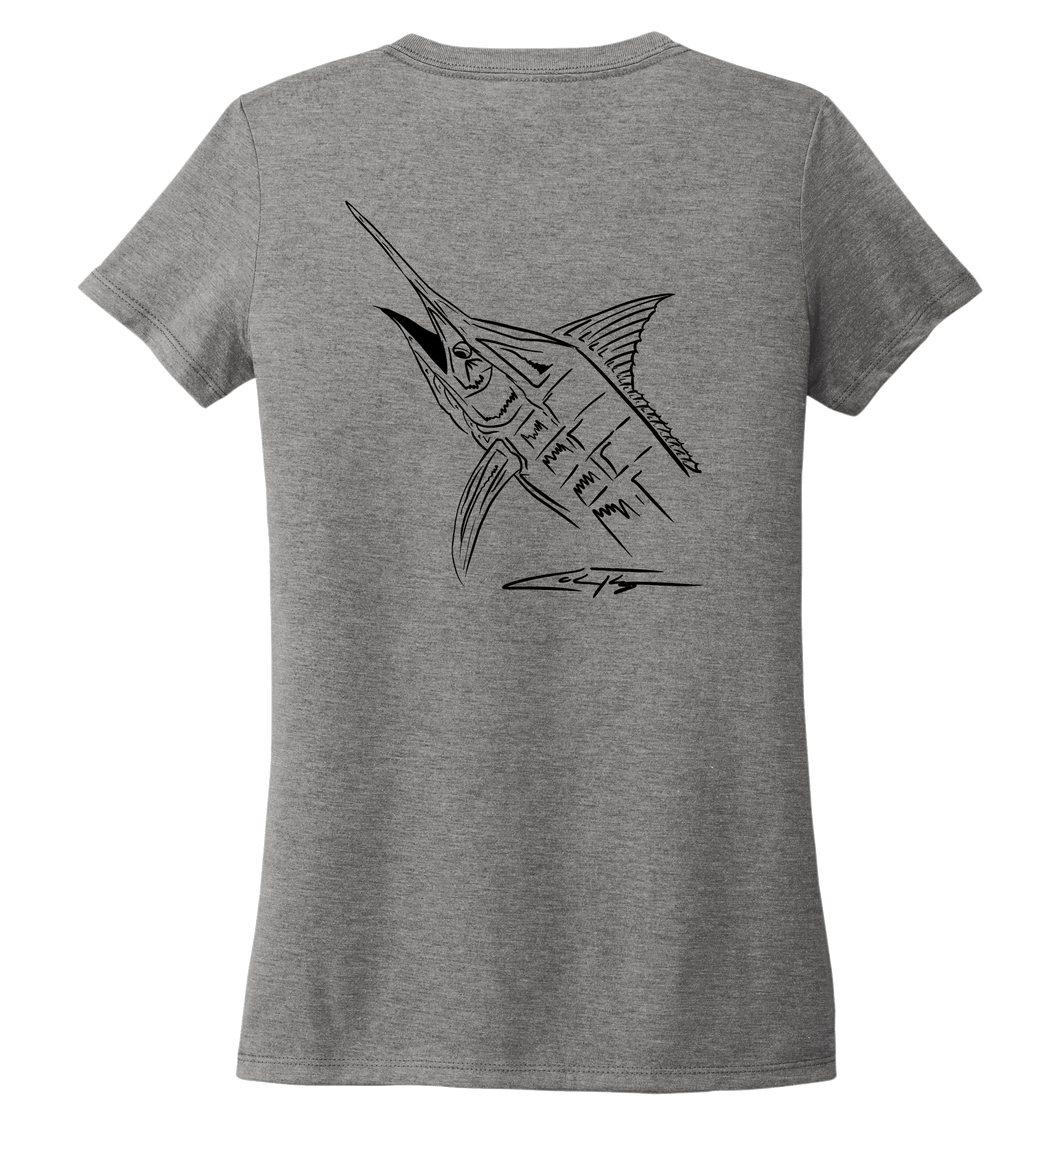 Colin Thompson, Marlin, Women's V-neck T-shirt in Oyster Grey